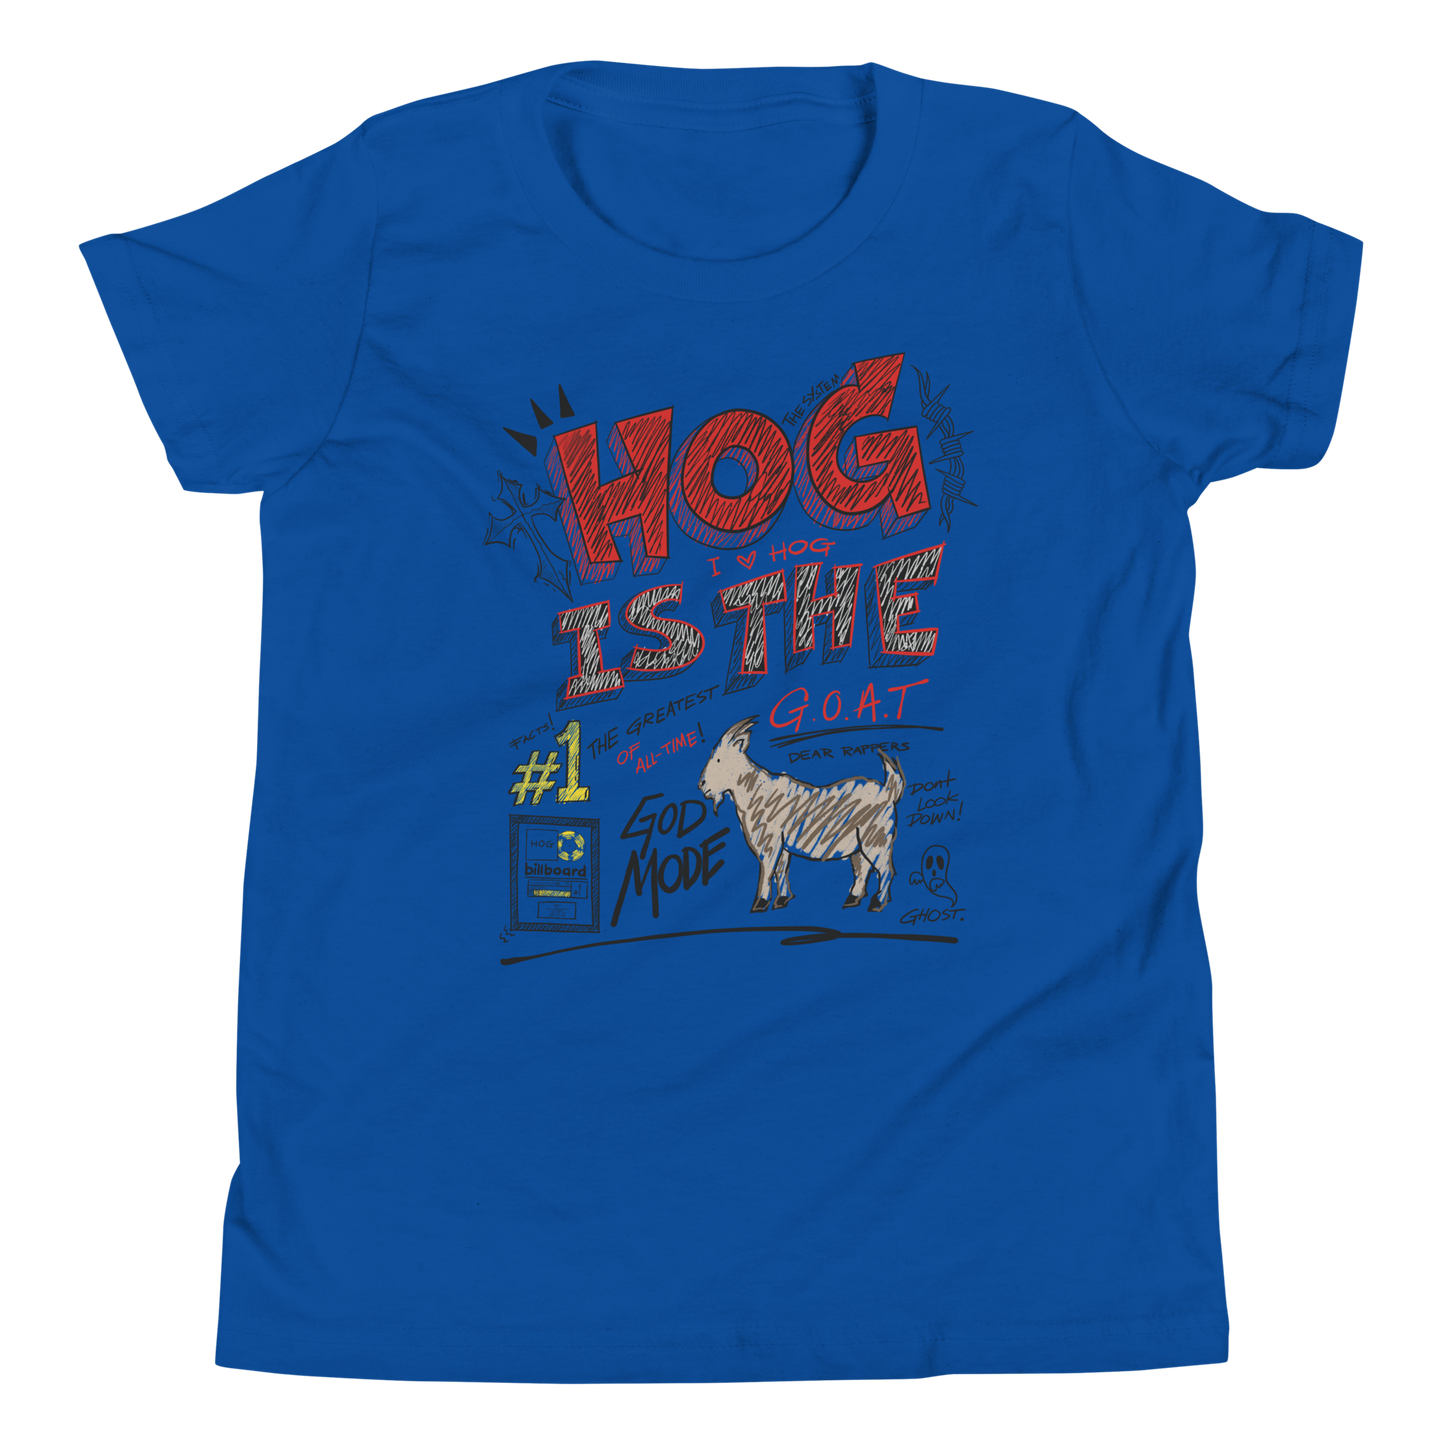 Youth "HOG is the G.O.A.T" T-Shirt